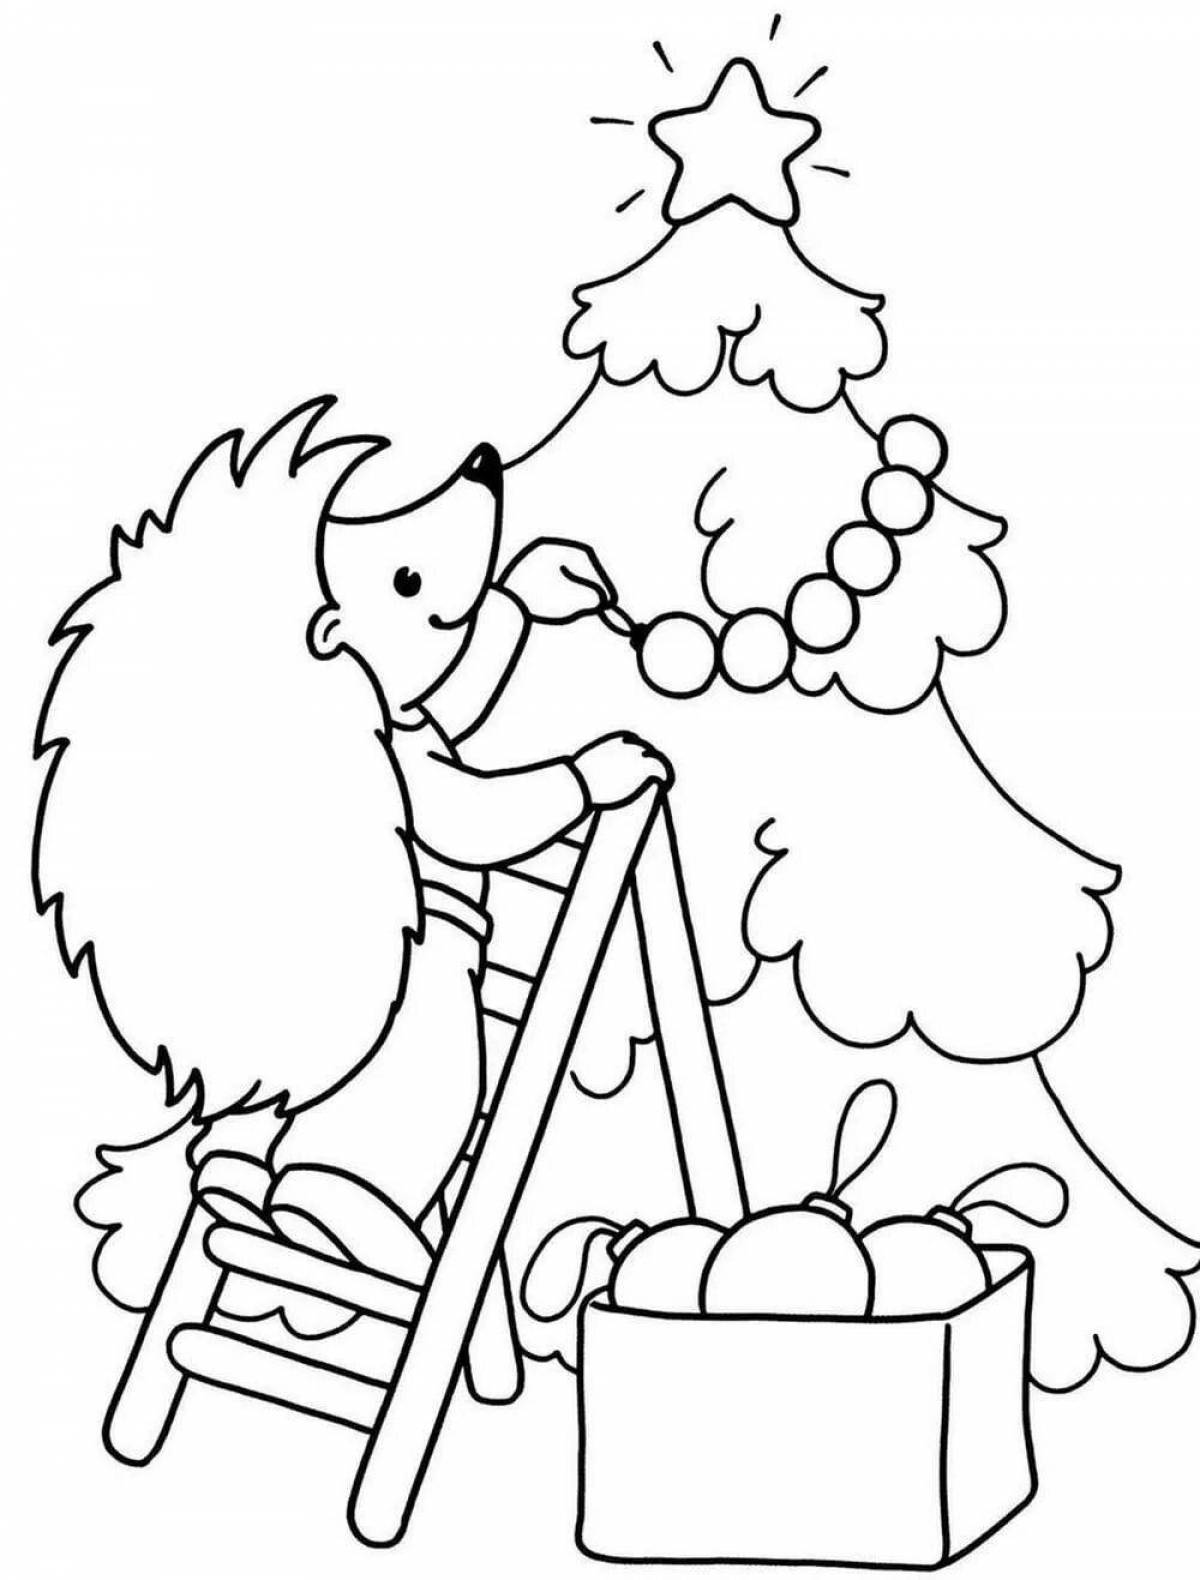 Holiday coloring hedgehog new year